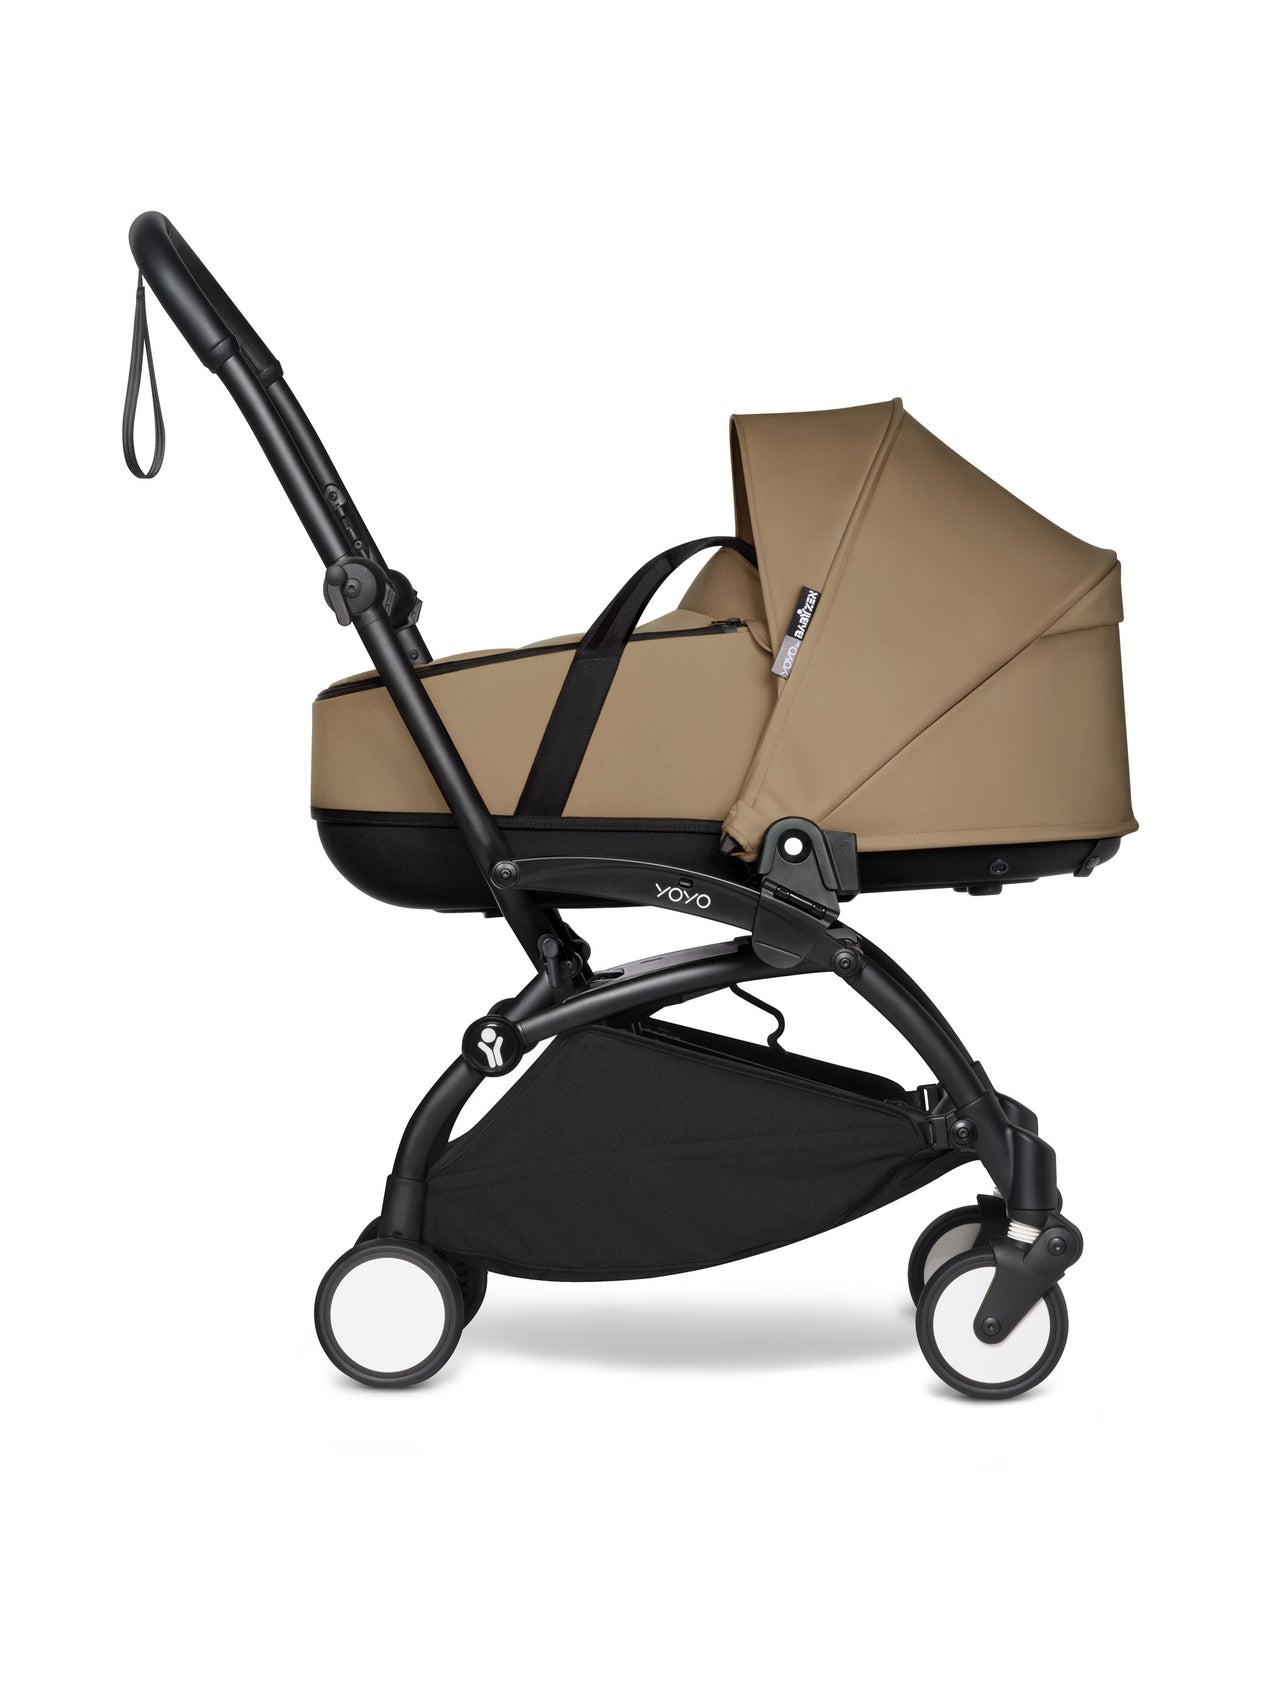 BABYZEN YOYO² (Black Frame) Complete with Bassinet  - Toffee with FREE BACKPACK